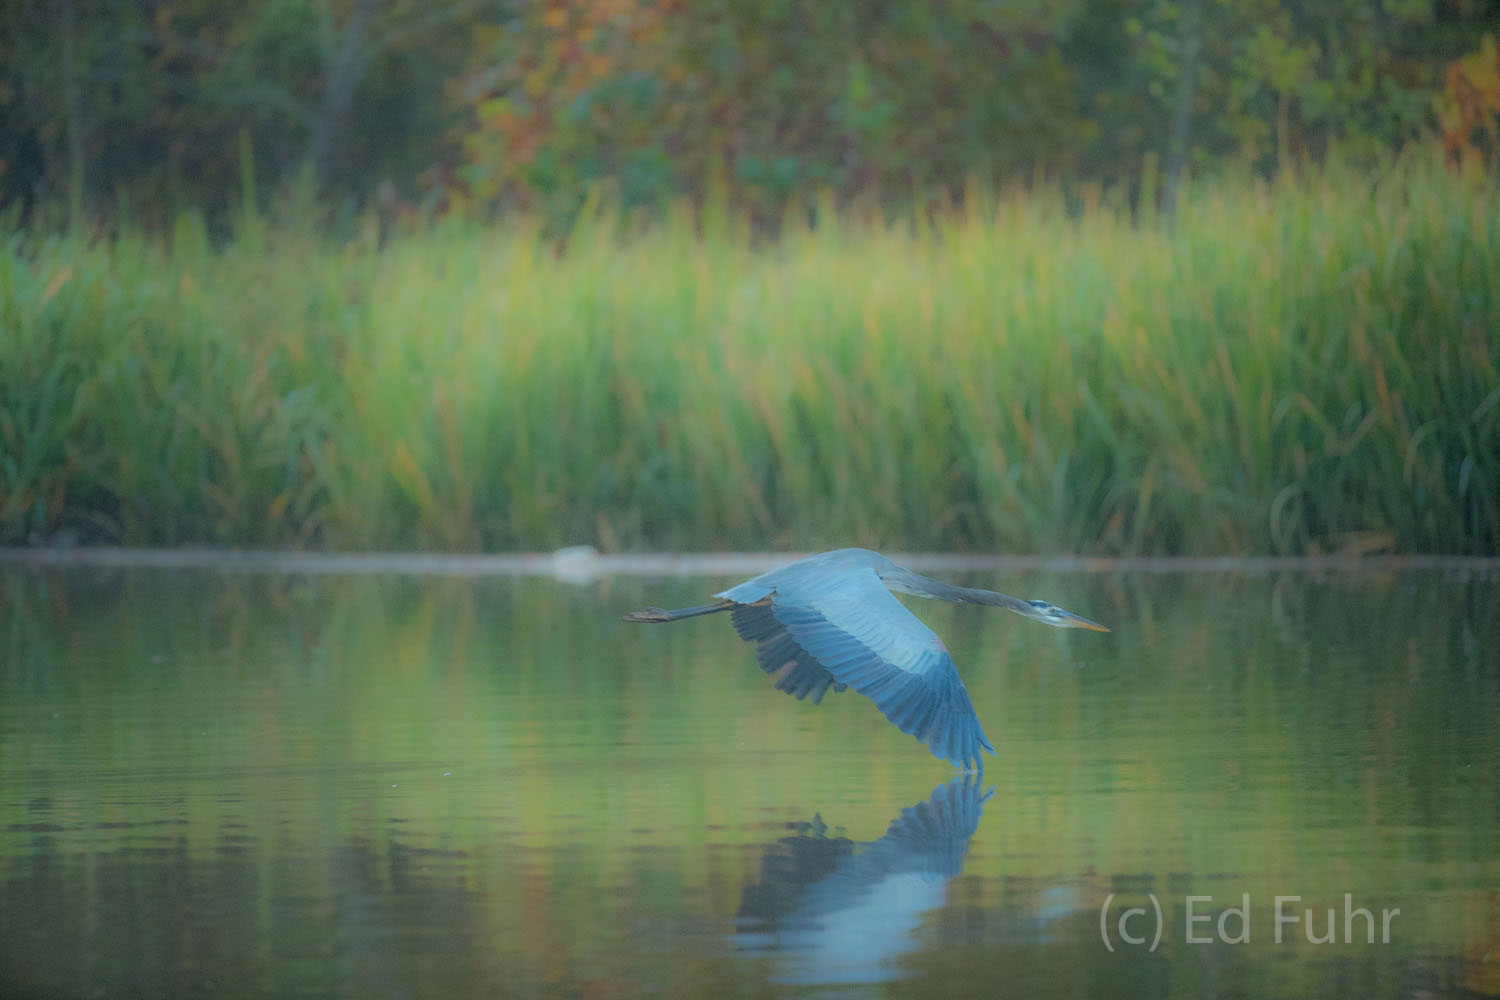 A great blue heron flies slowly across the still waters of the James River.